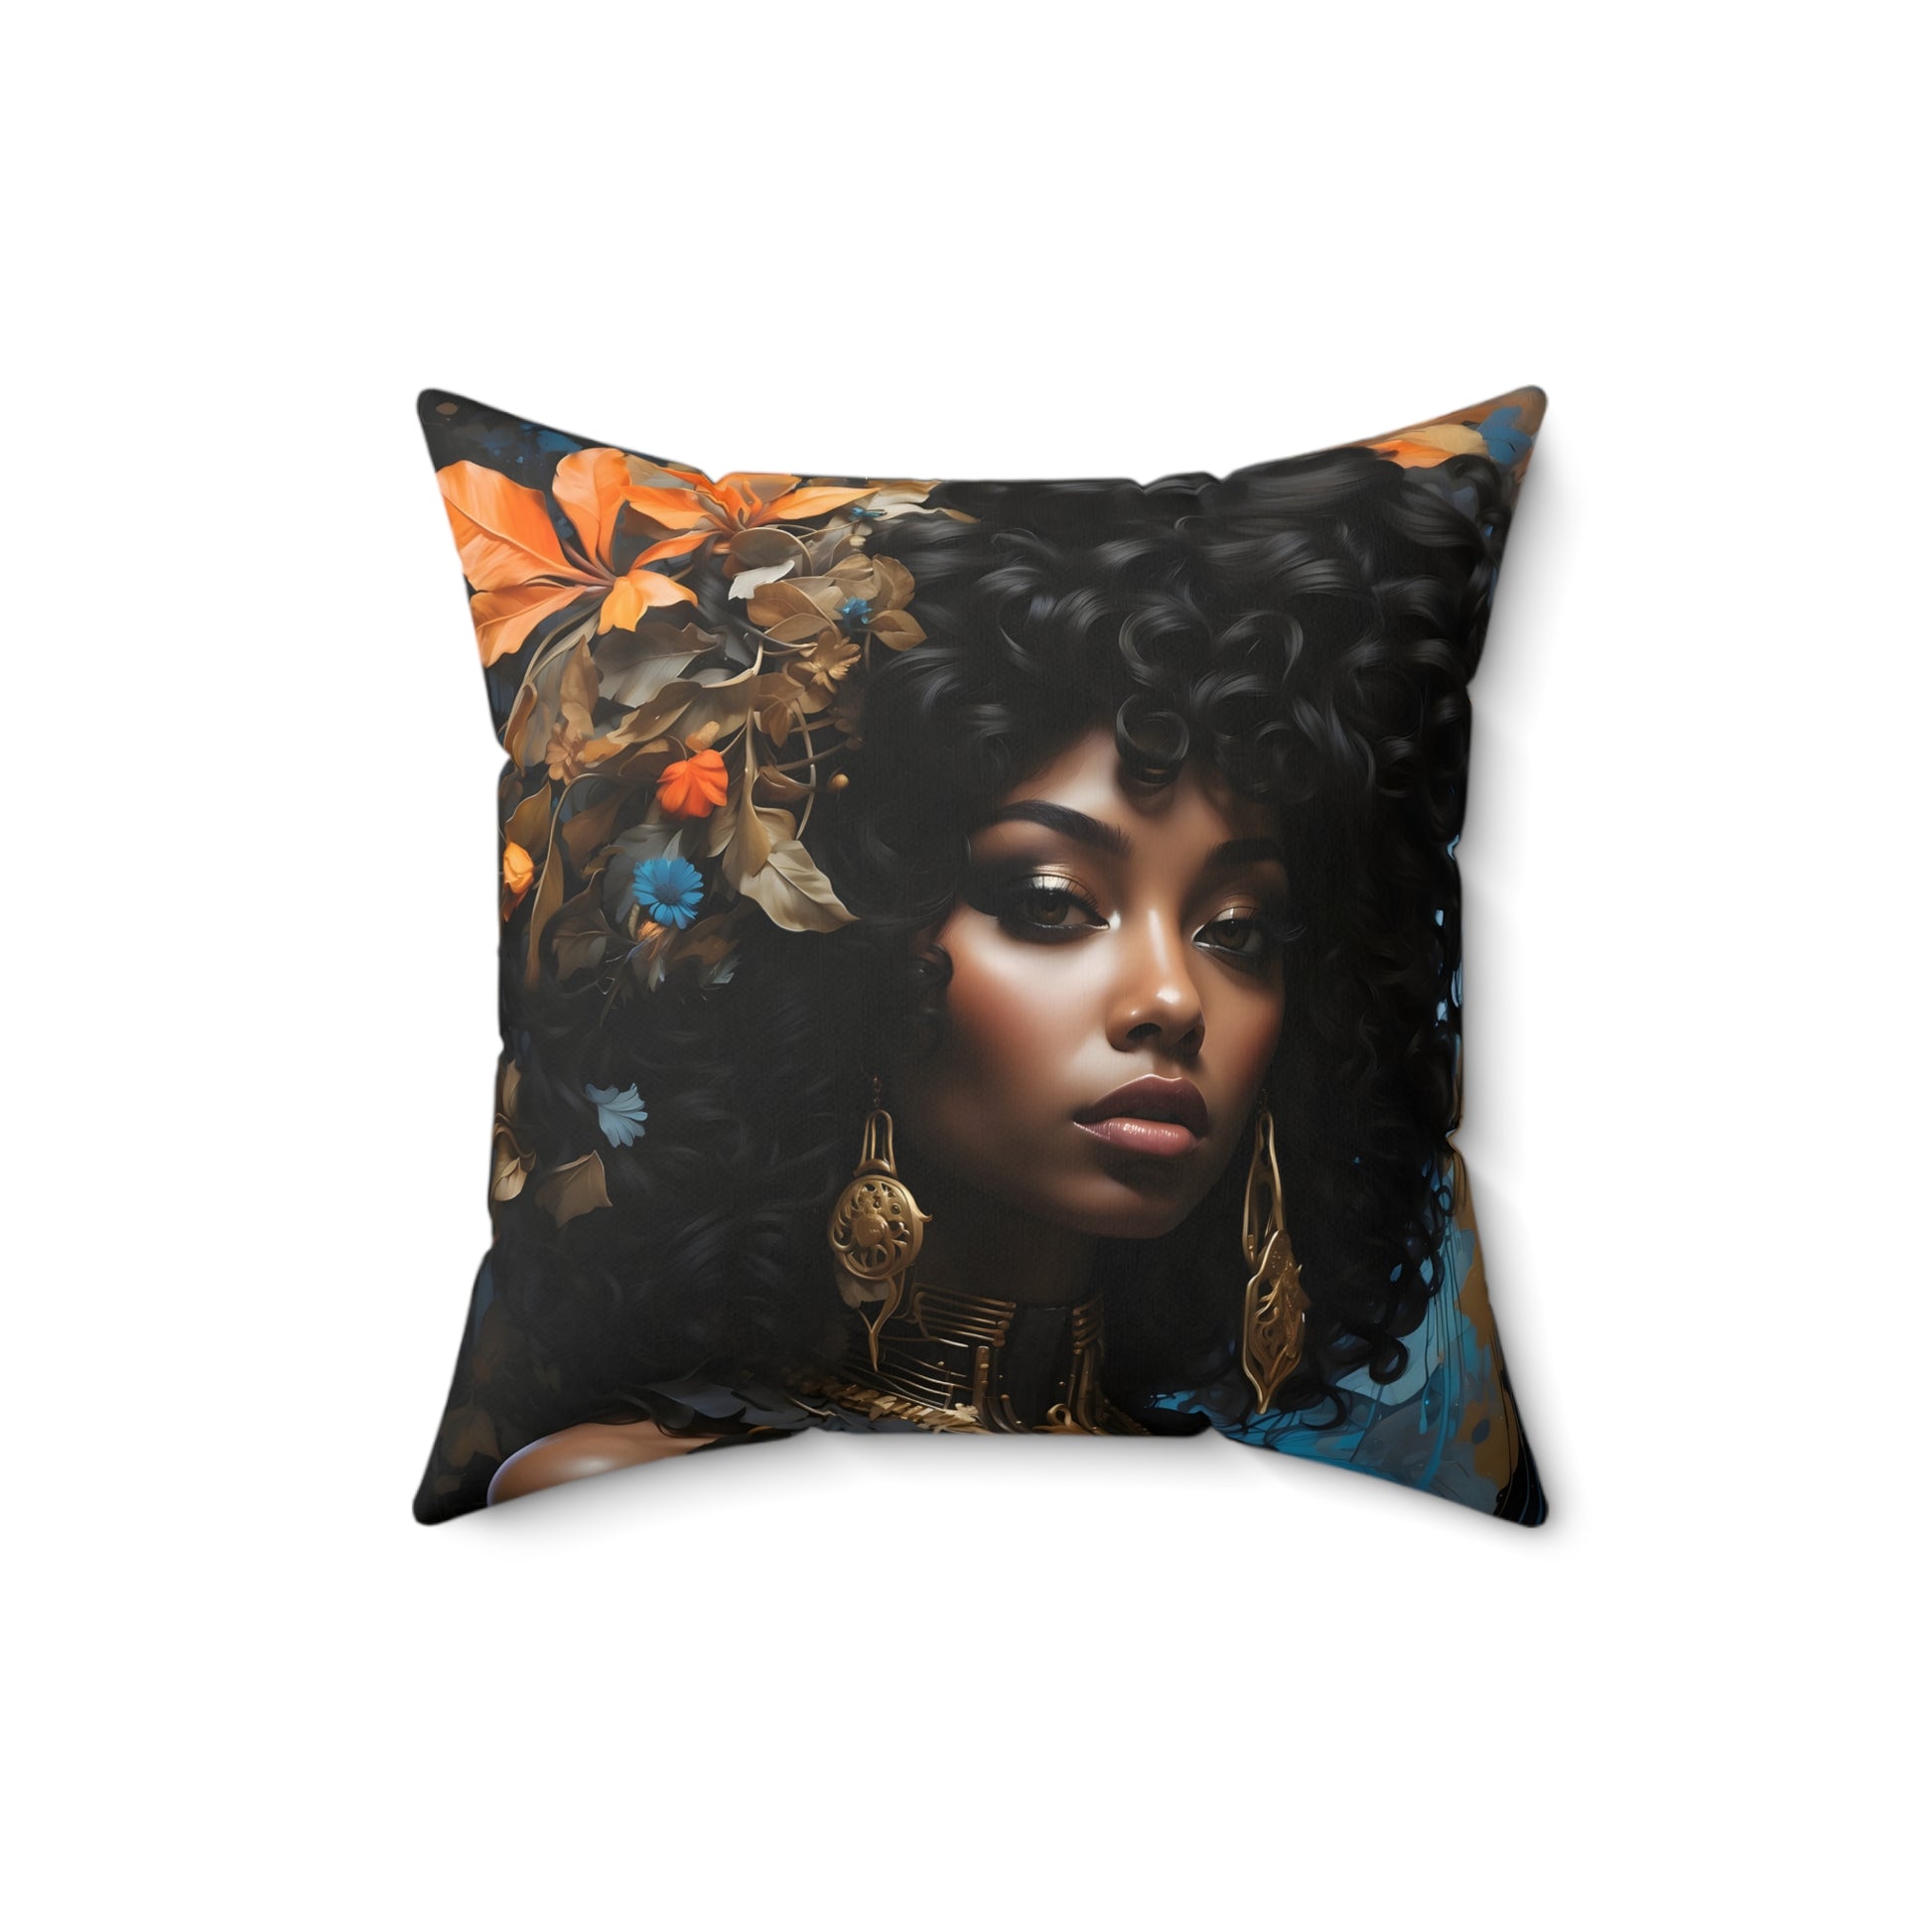 Square Portrait Pillow featuring a beautiful African American woman profile, made with 100% Polyester cover and pillow, includes concealed zipper.